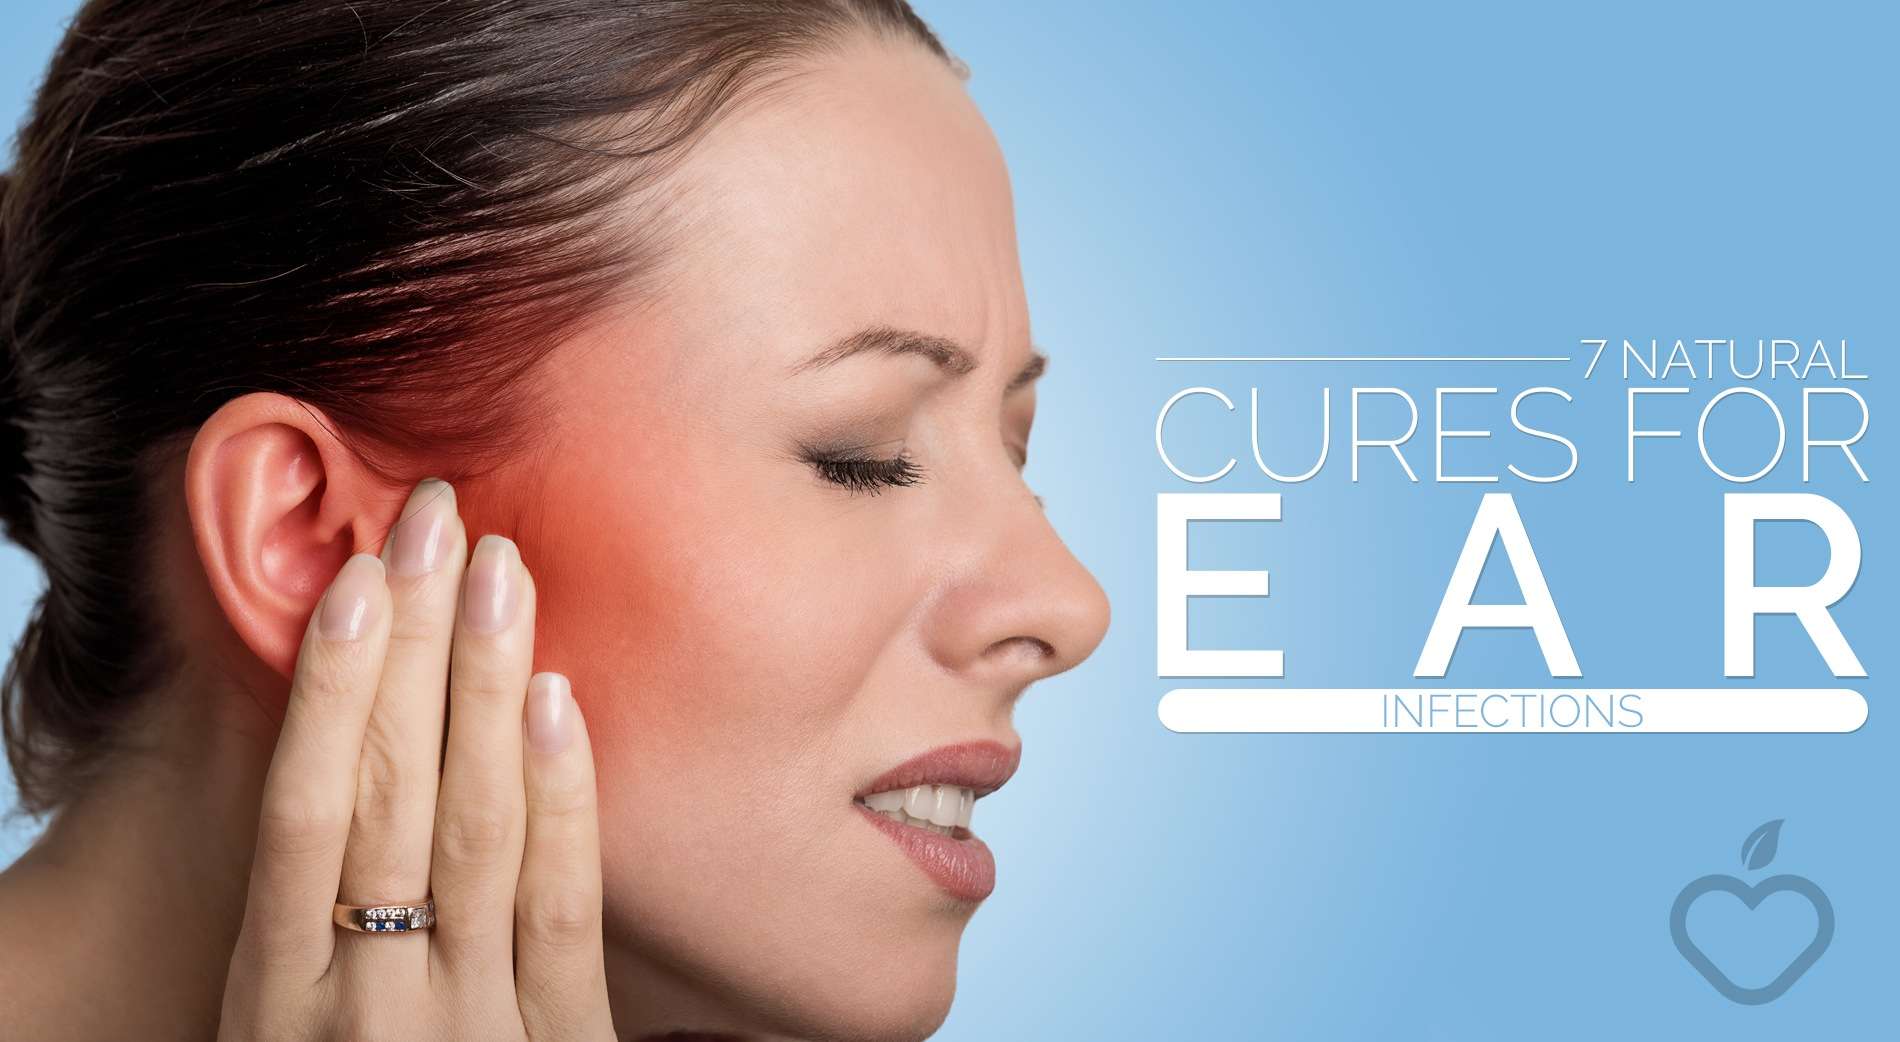 7 Home Remedies For Ear Infections! [2021 UPDATED!]